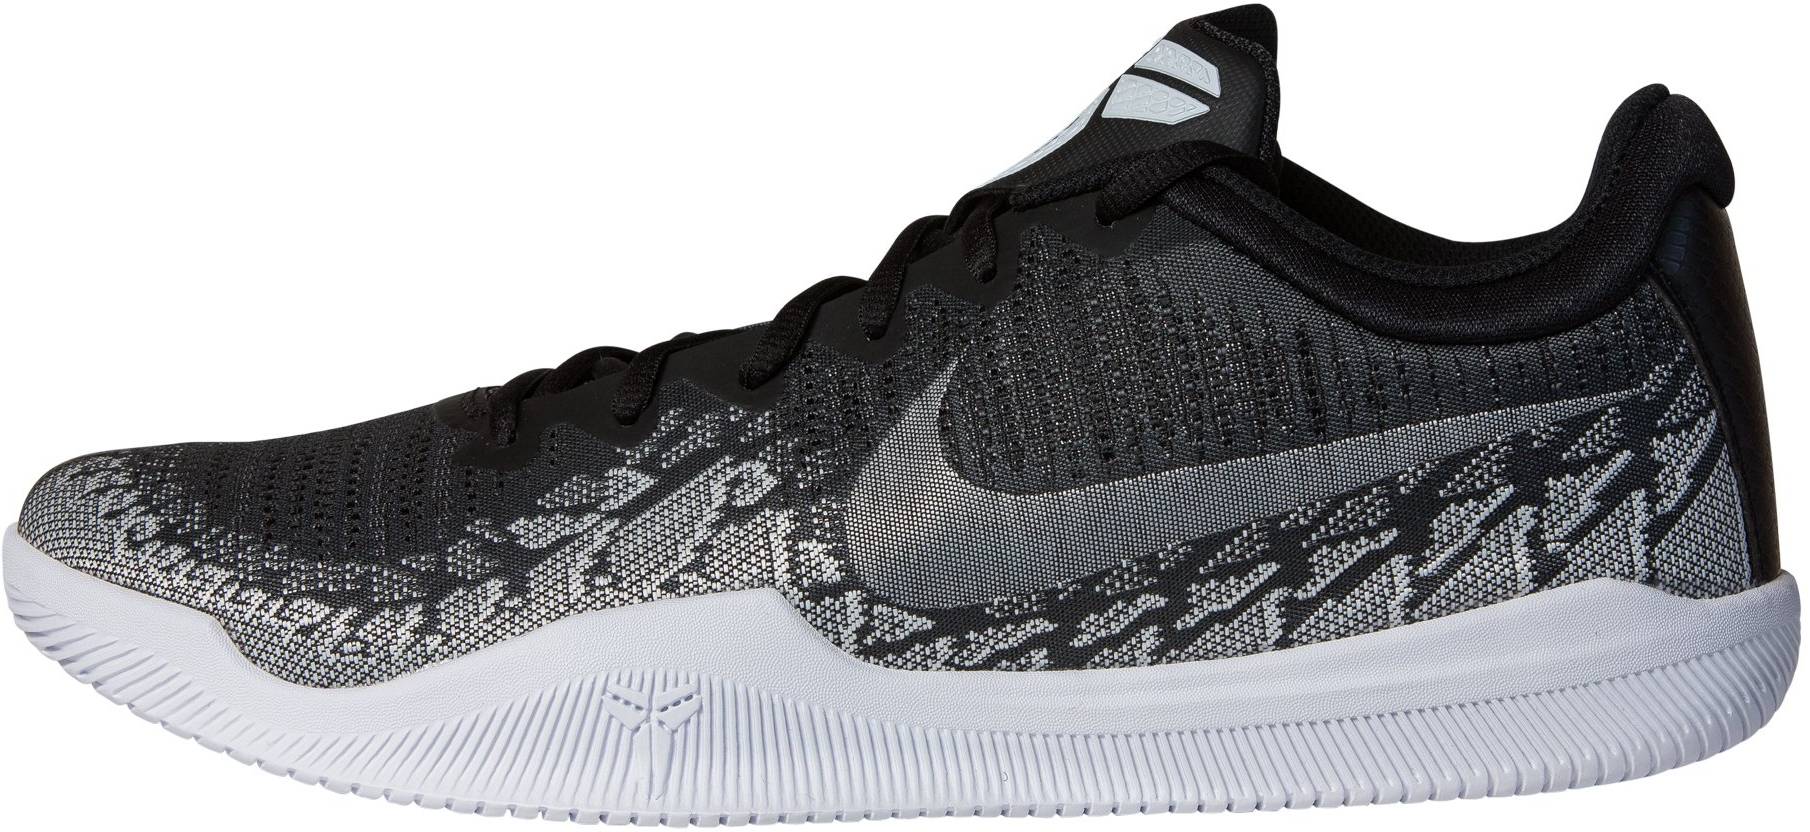 Nike Mamba Rage - Deals, Facts, Reviews 